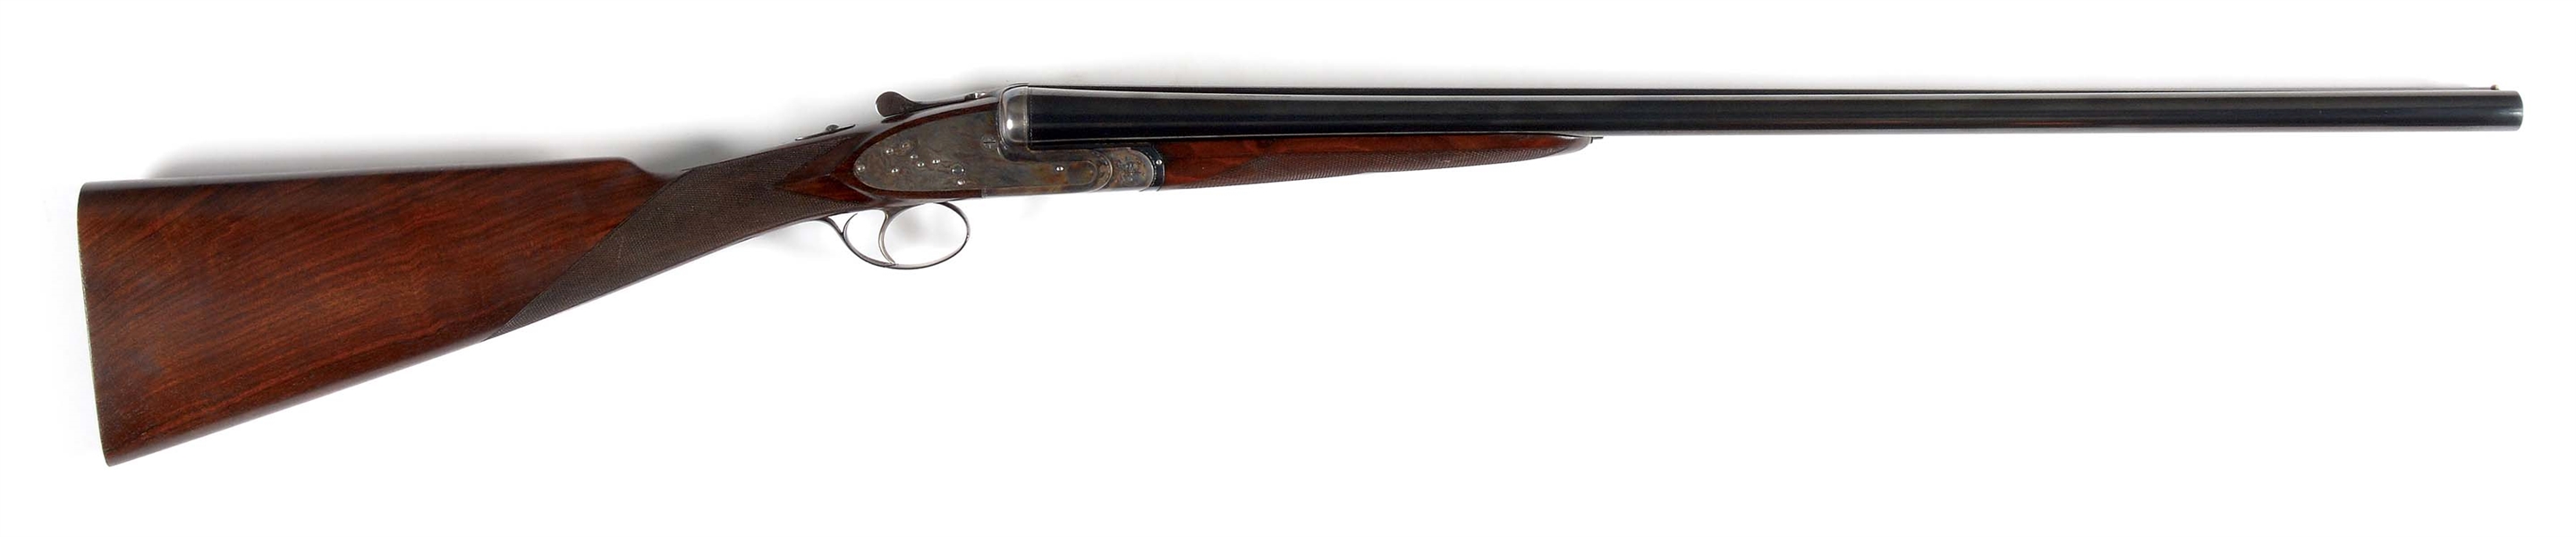 (M) PIOTTI SIDELOCK EJECTOR SINGLE TRIGGER GAME SHOTGUN WITH SPECIAL ORDER CASE HARDENED ACTION.